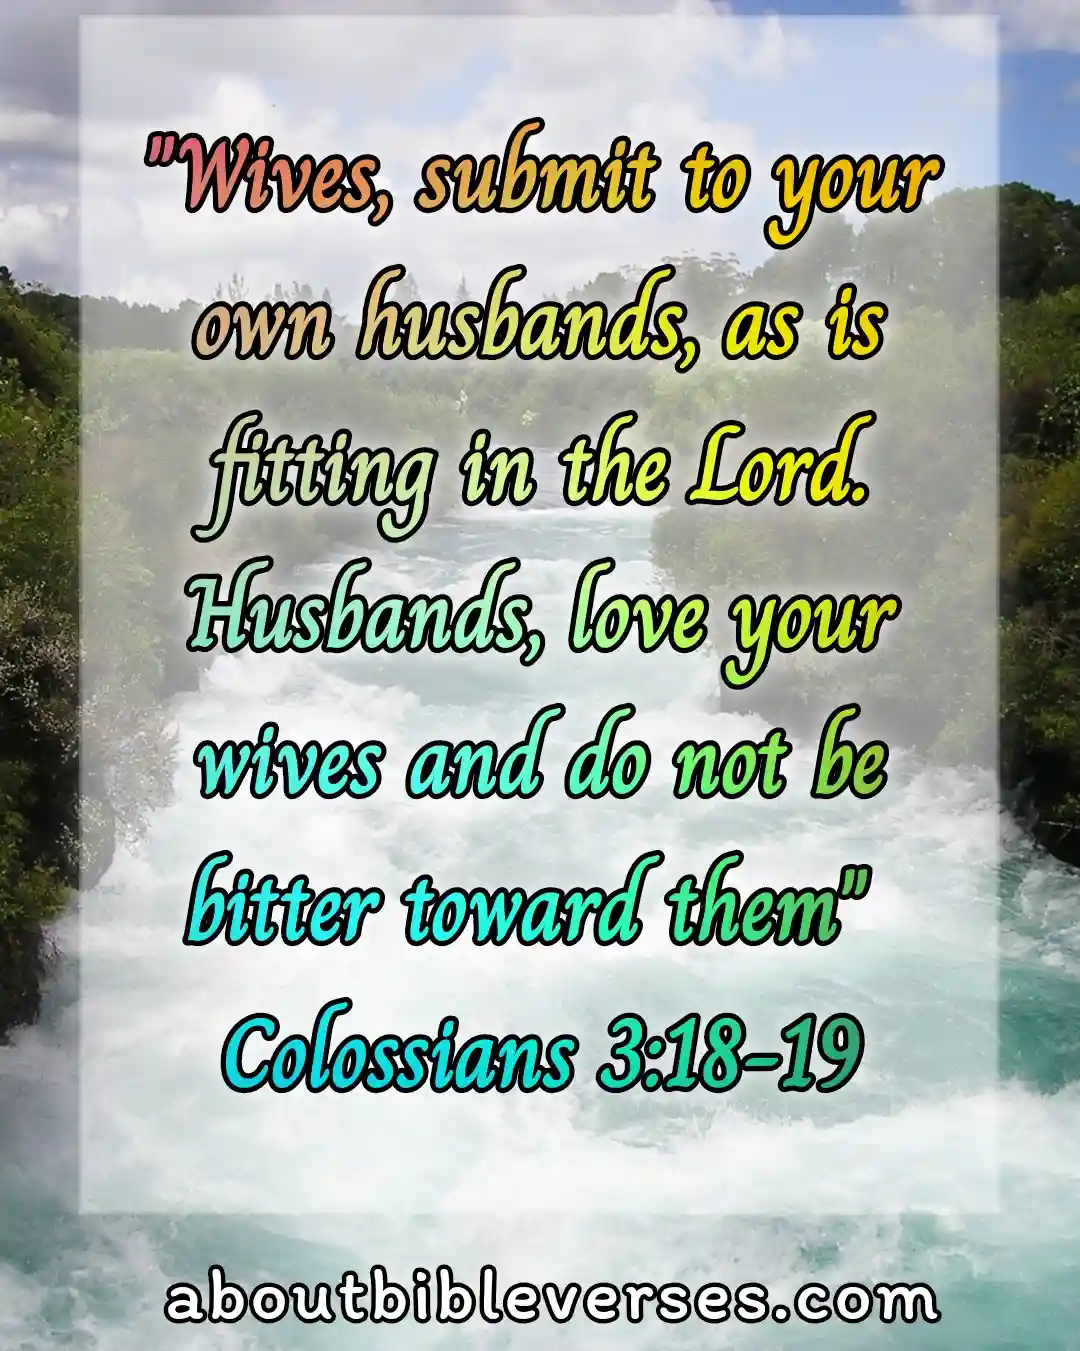 bible verses husband and wife relationship (Colossians 3:18-19)